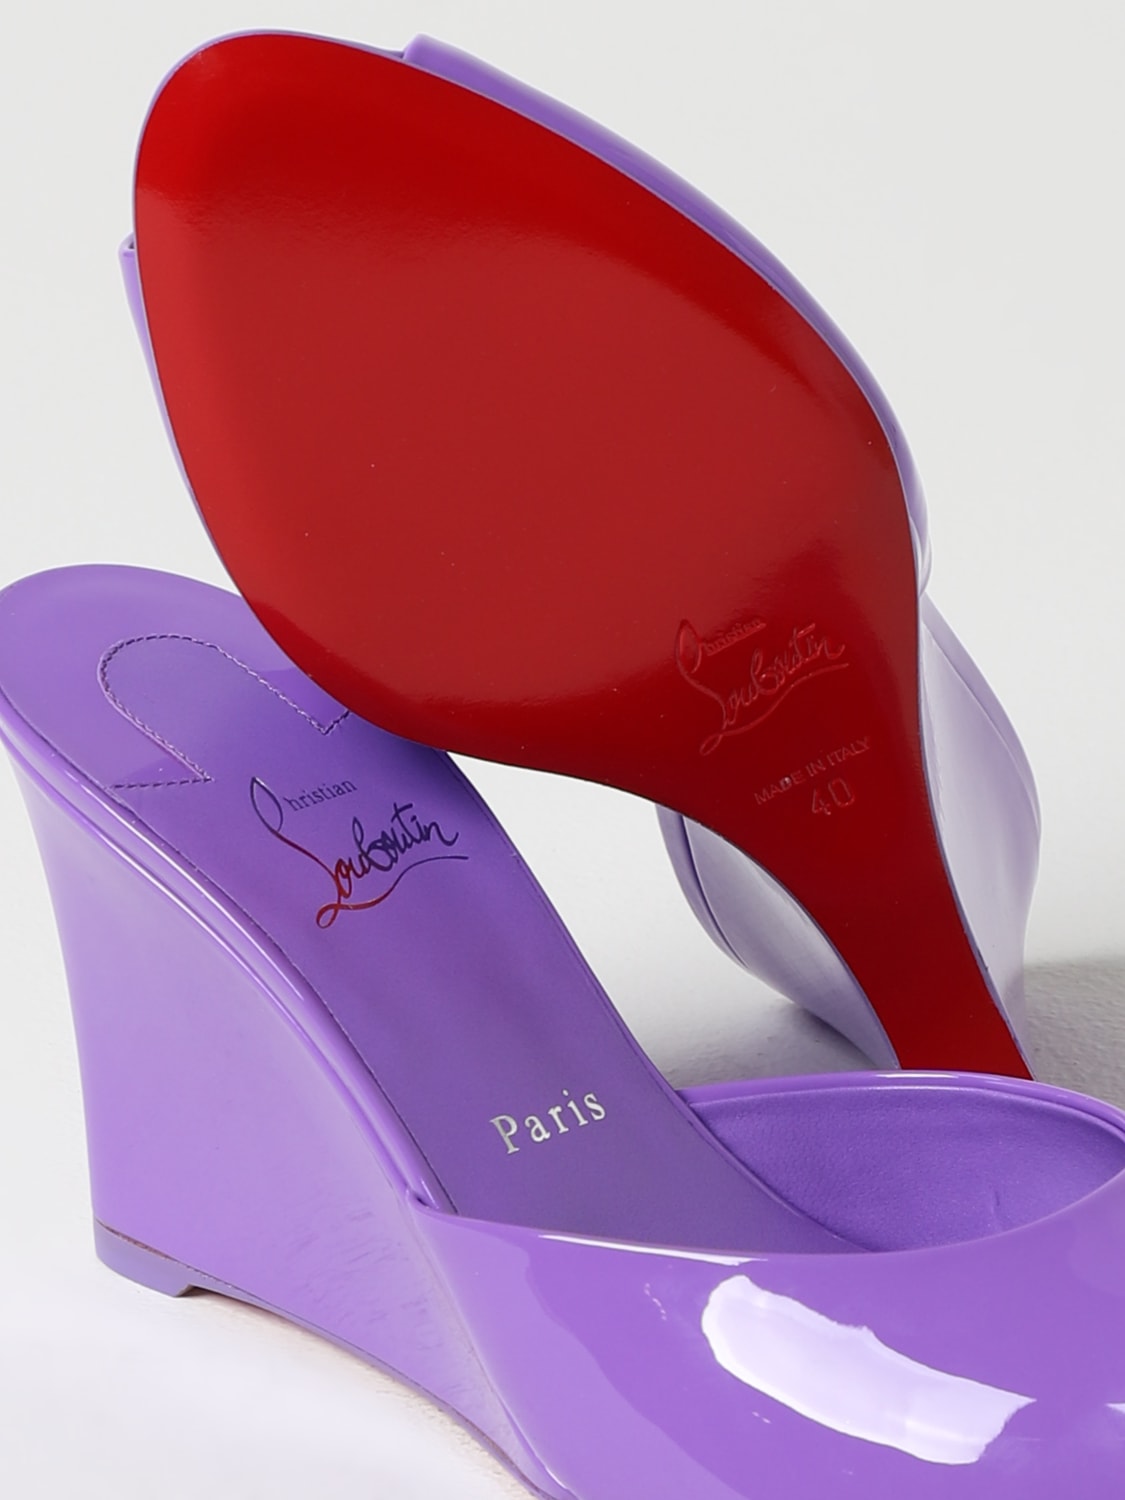 Christian Louboutin Dolly Patent Red Sole Pumps